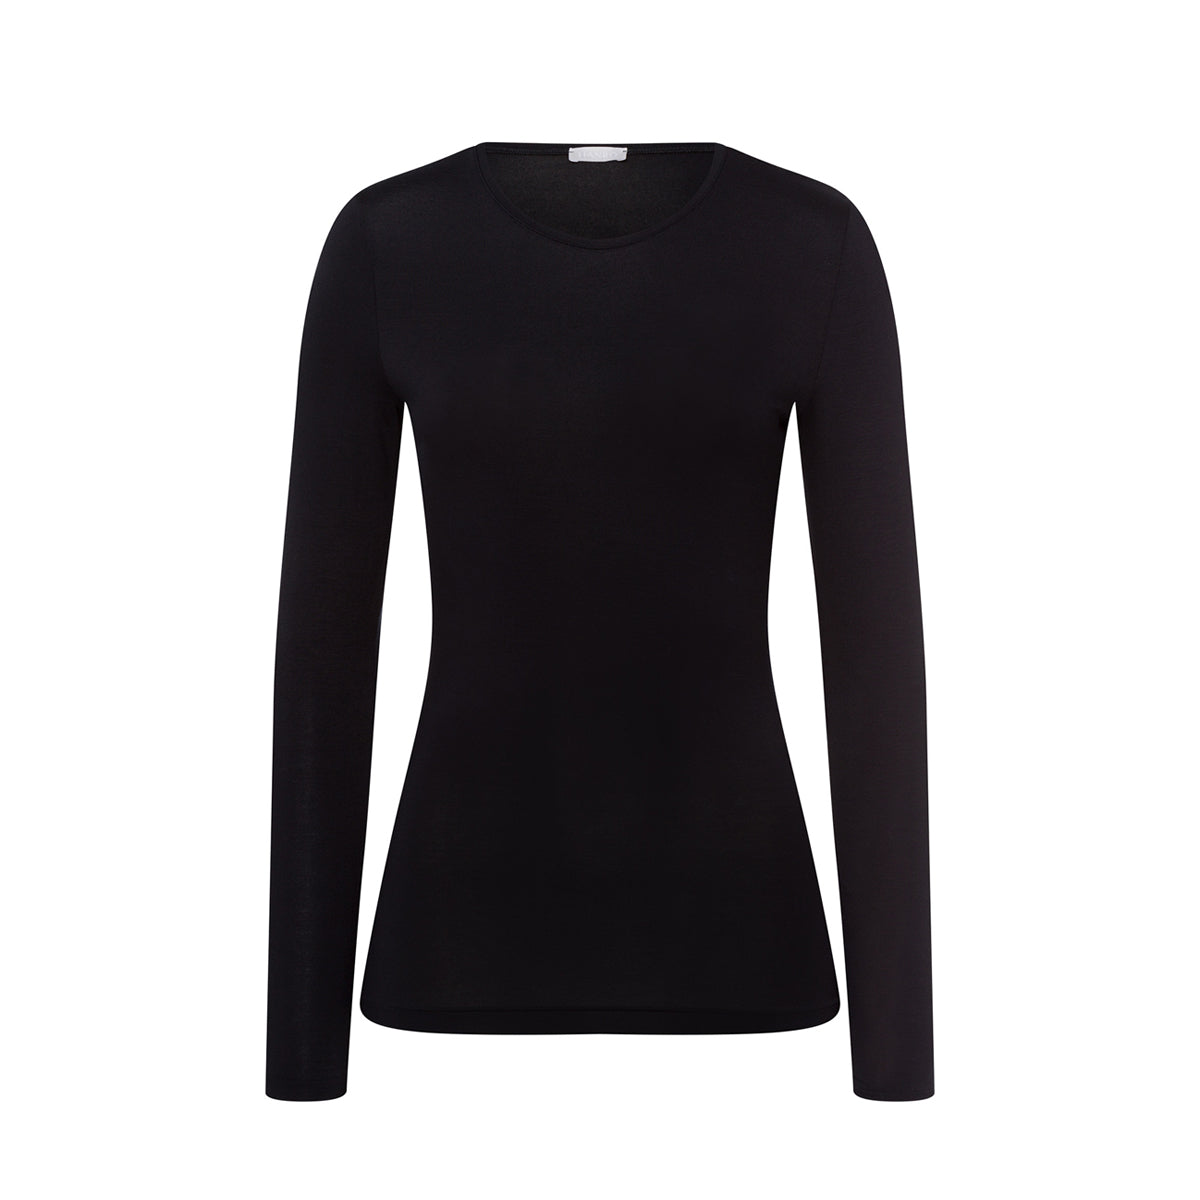 Hanro Soft Touch Long Sleeve Top